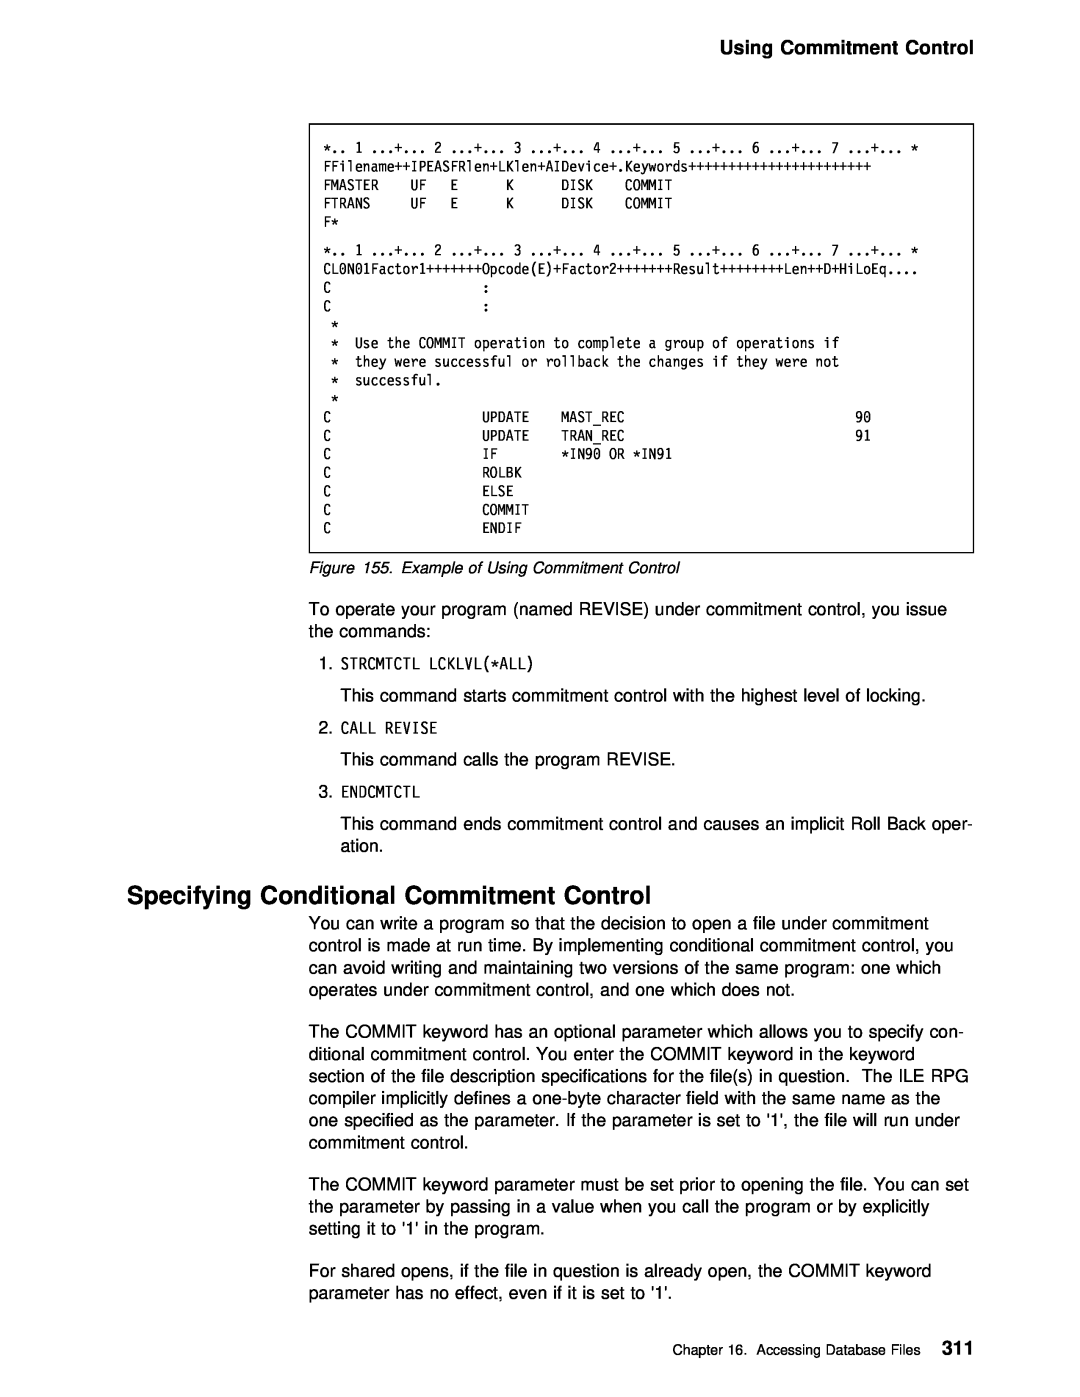 IBM AS/400 manual Lcklvl*All, 2CALL. REVISE, 3ENDCMTCTL, Using Commitment Control 